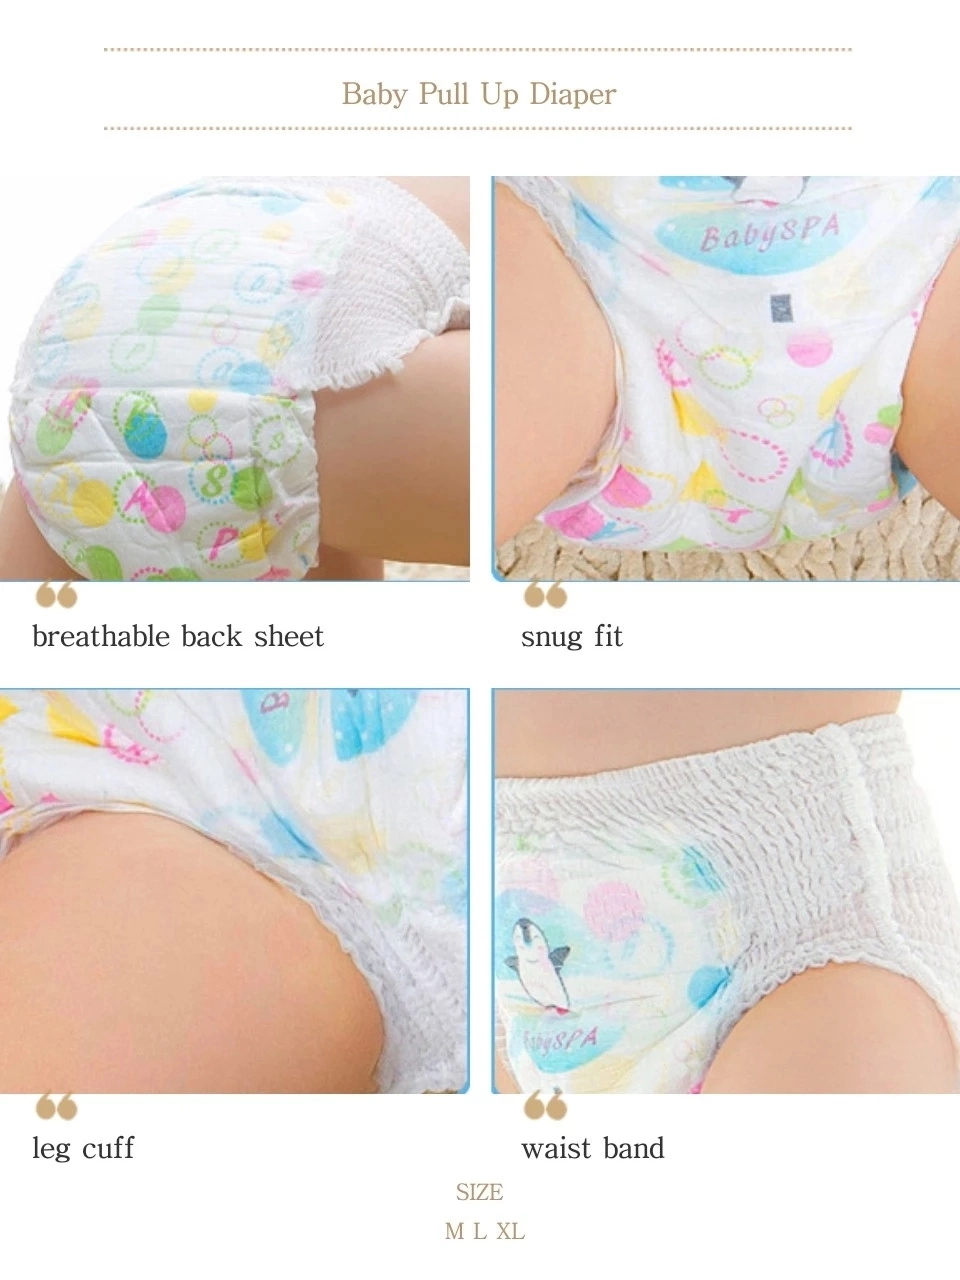 Diaper Factory Offer Top Quality Competitive Price Disposable Pant Style Baby Diaper Manufacturer From China